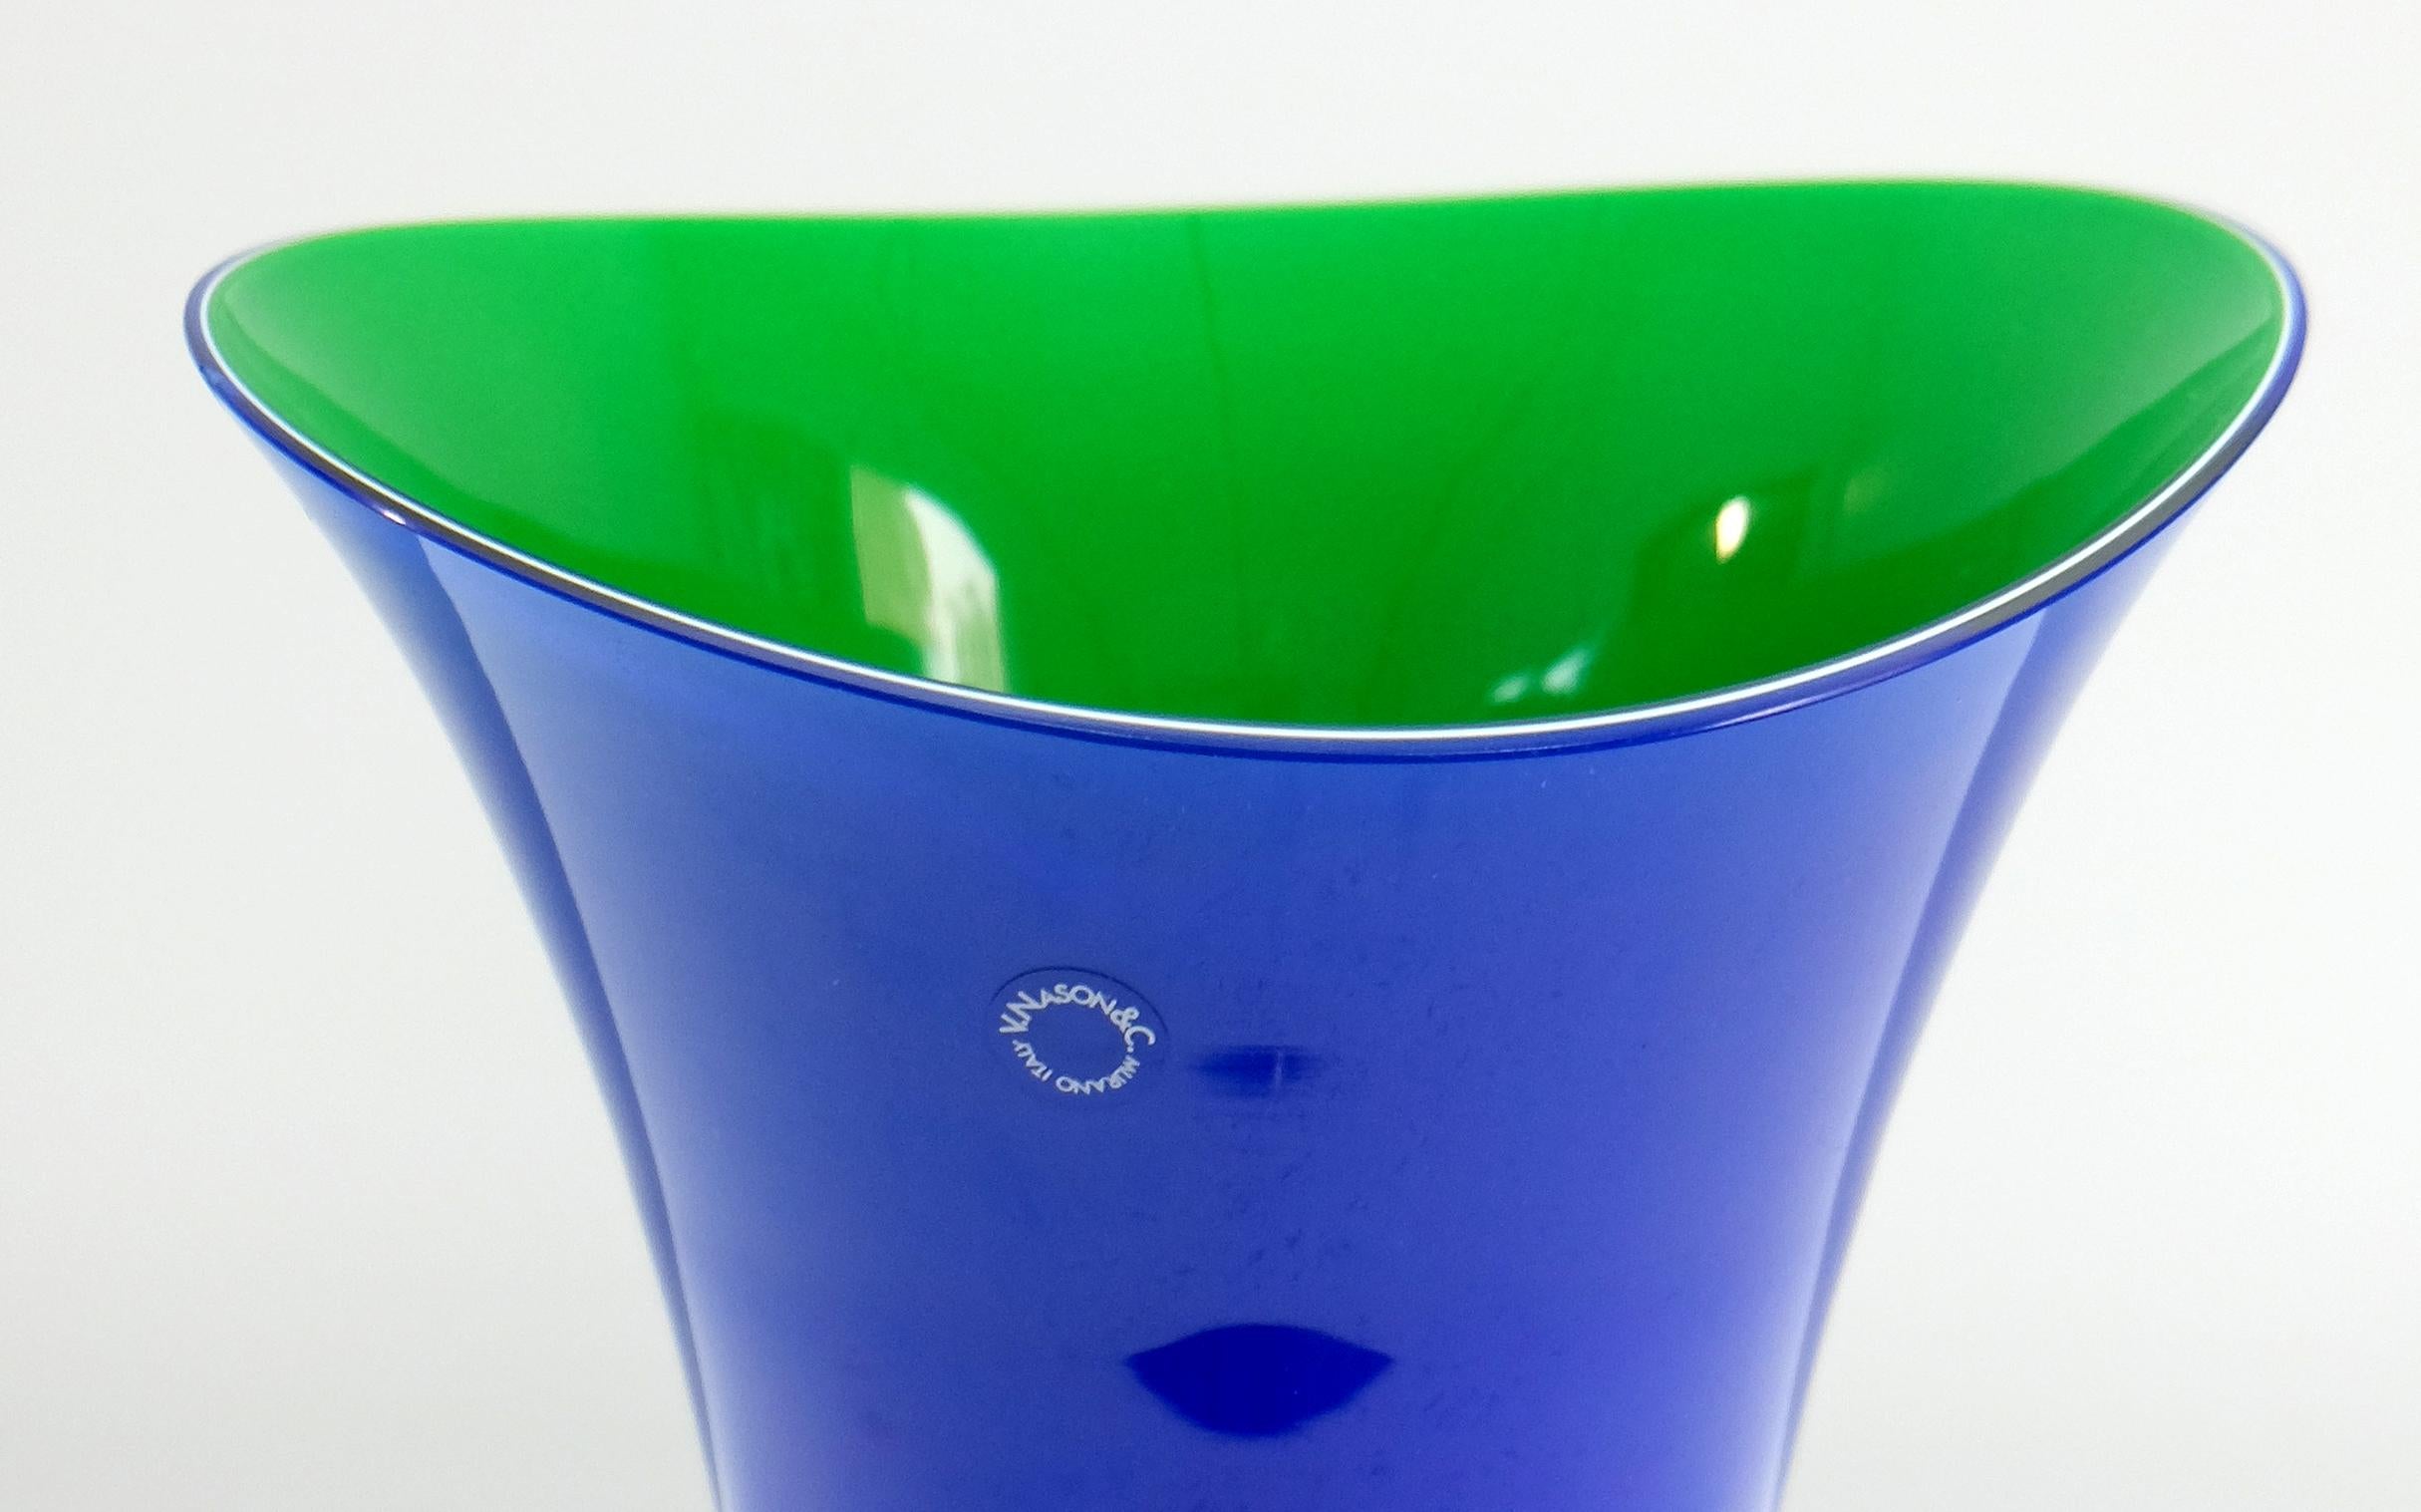  
Murano Glass Vase Set by V. Nason & C. Italy, Blue and Green Asymmetric Vases

Offered for sale is a striking pair of hand-blown asymmetrical vases in blue and green by V. Nason & C. The vases retain the original maker's label.
Vincenzo Nason